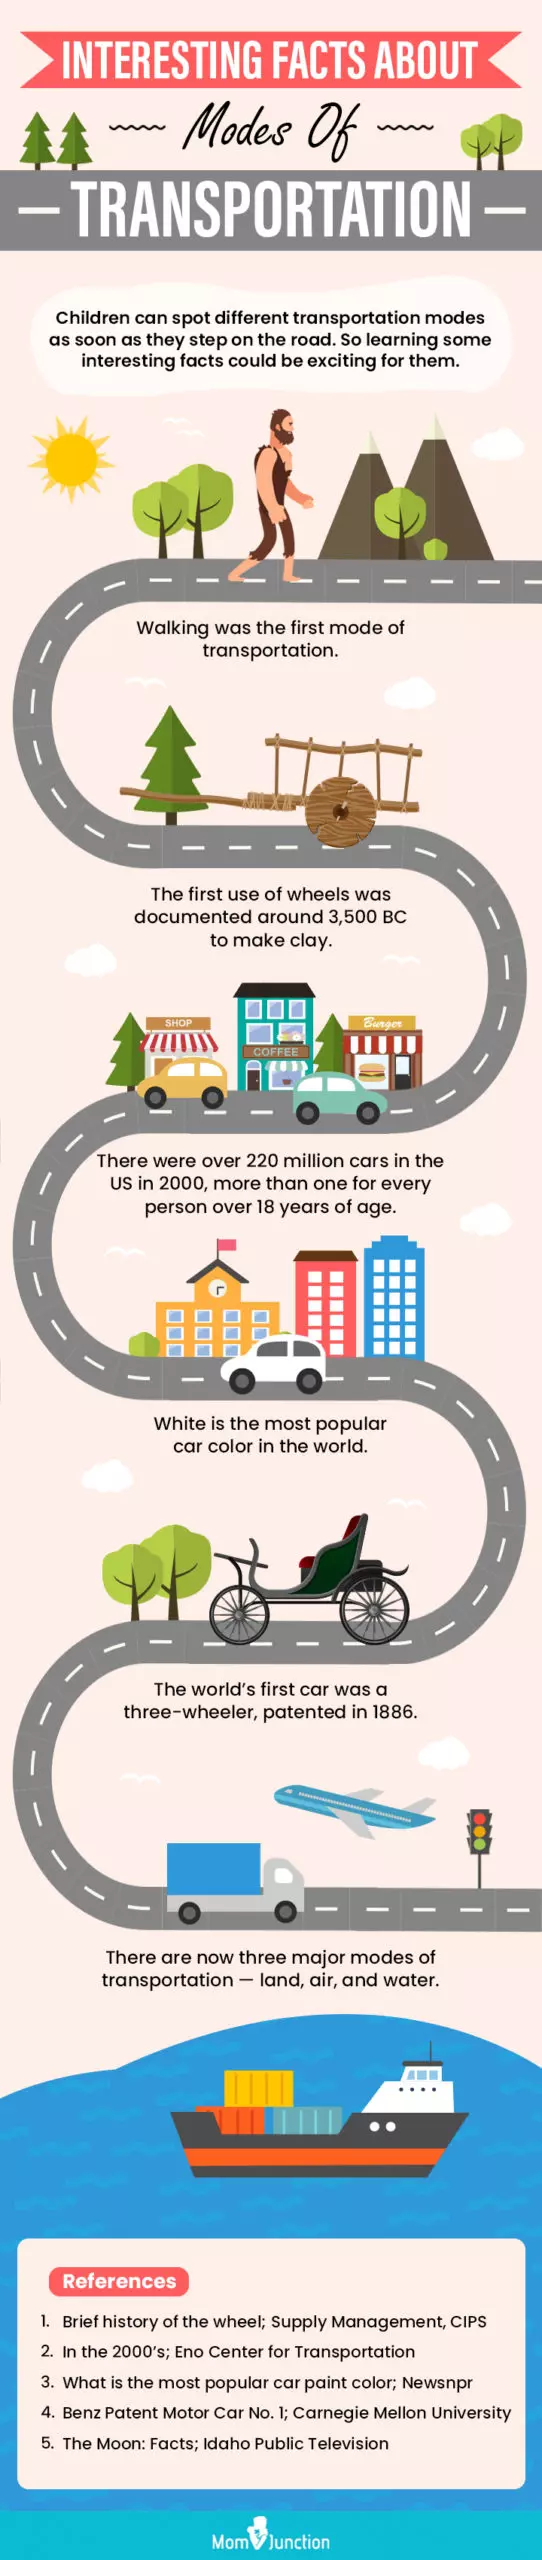 interesting facts about modes of transportation (infographic)